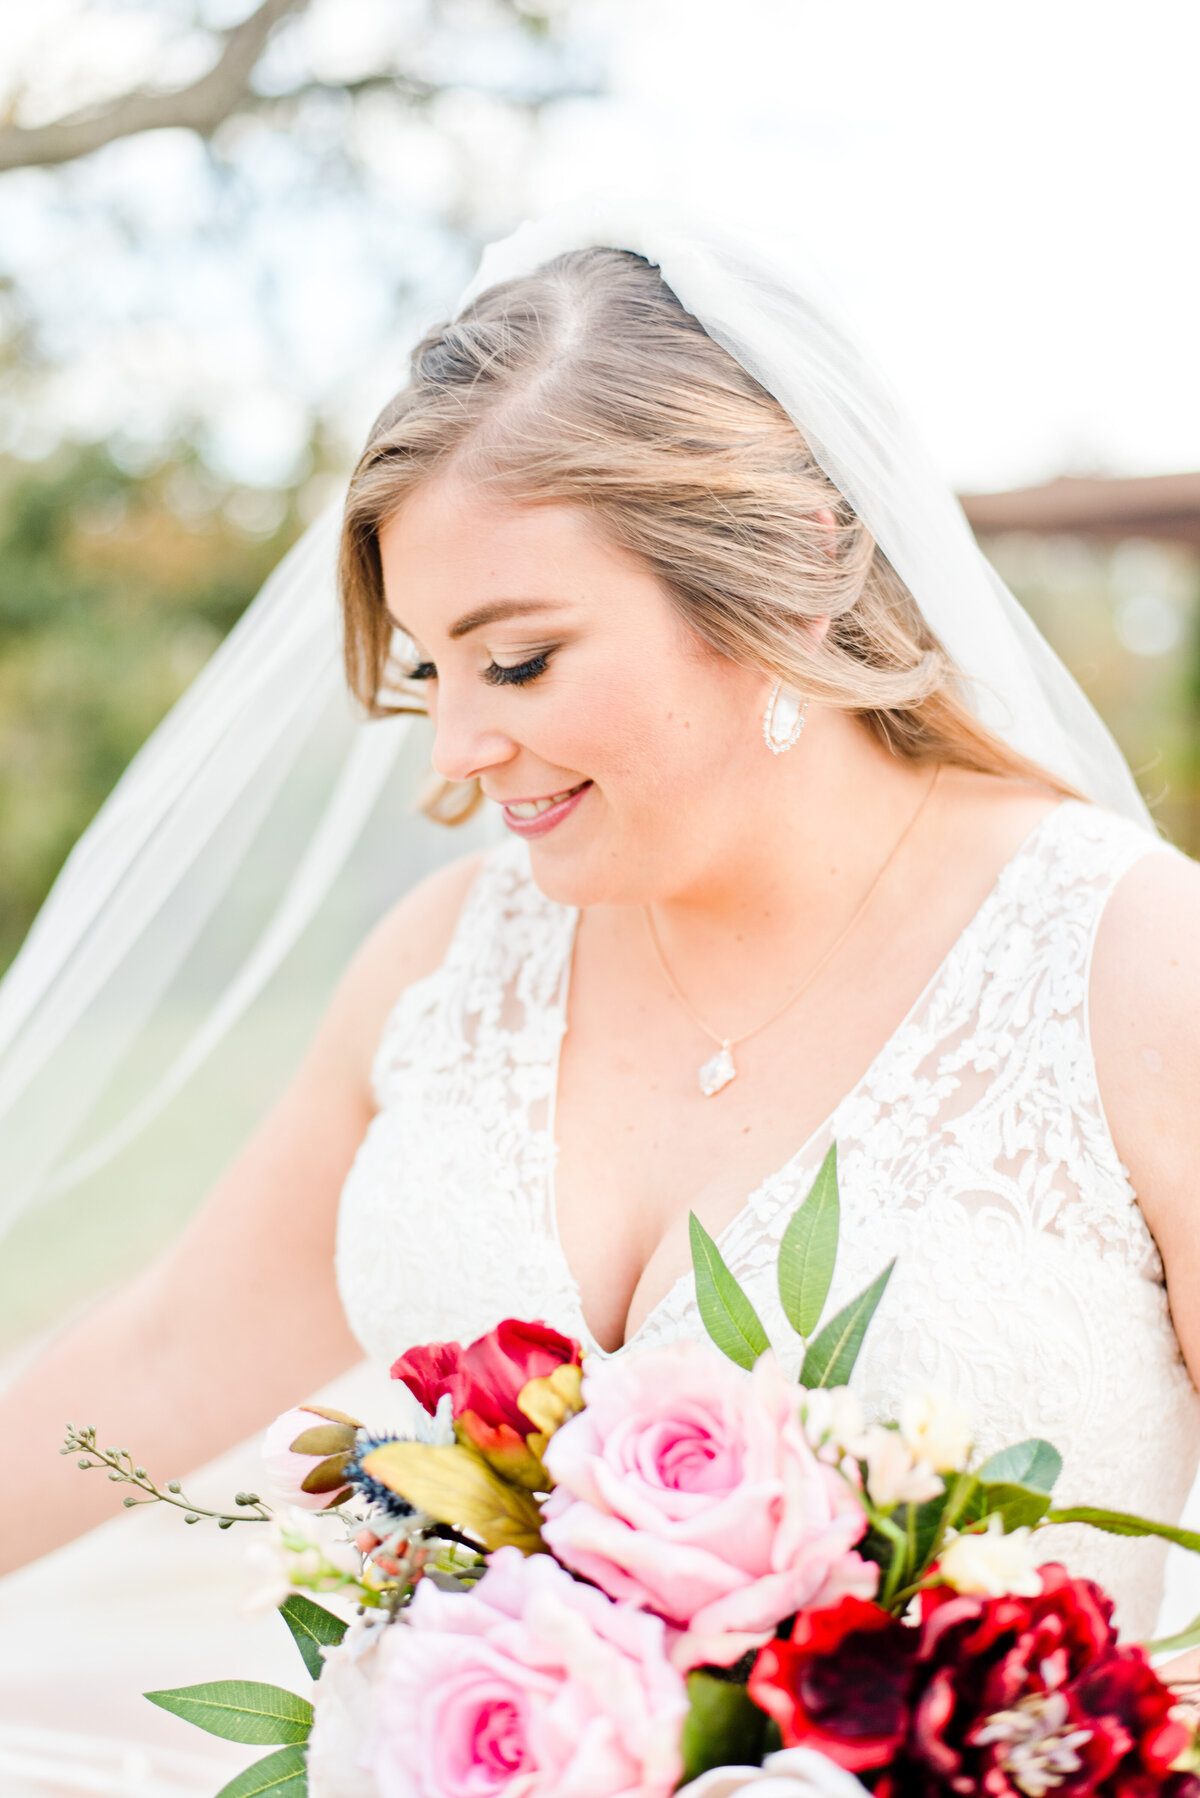 Close up photo of bride with colorful bouquet